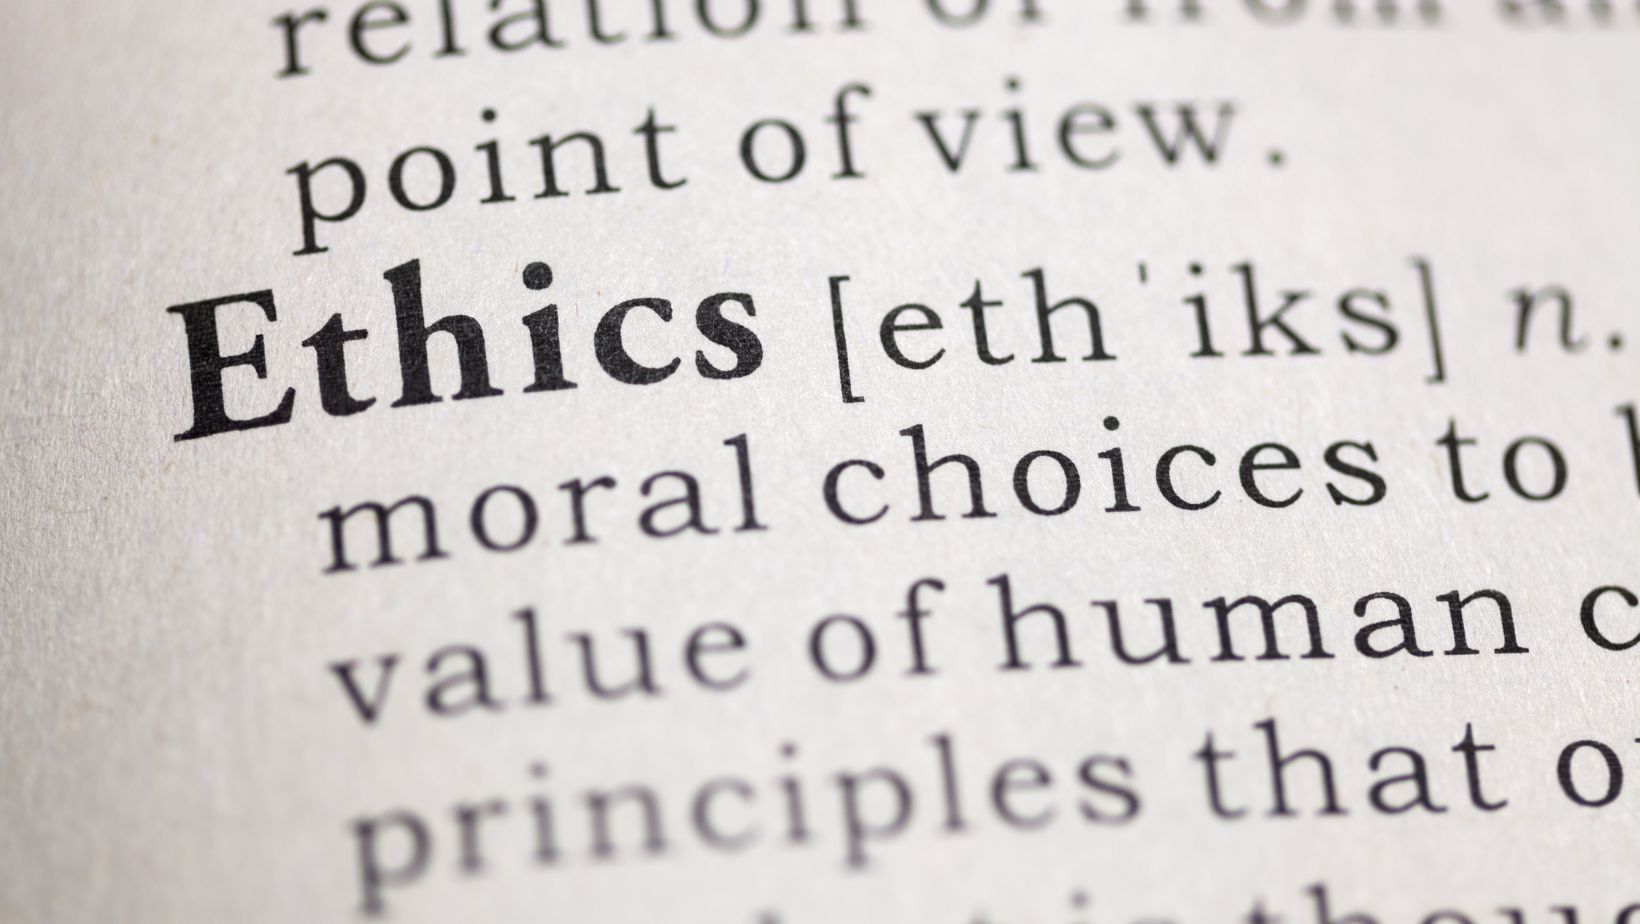 the most basic question in an ethics-based management system is